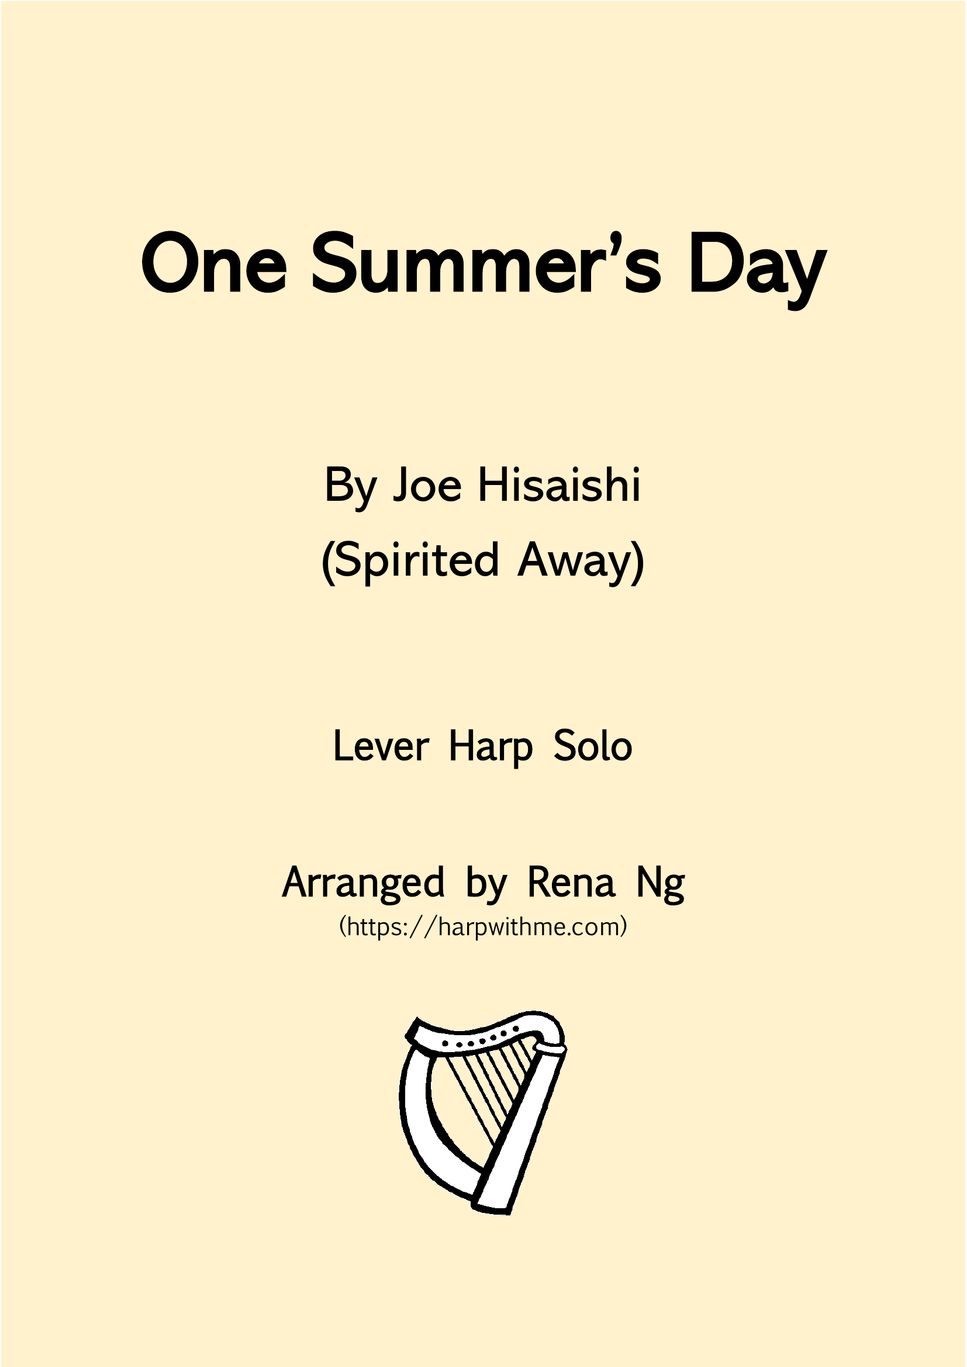 Spirited Away - One Summer's Day (Lever Harp Solo) - Advanced Intermediate by Harp With Me